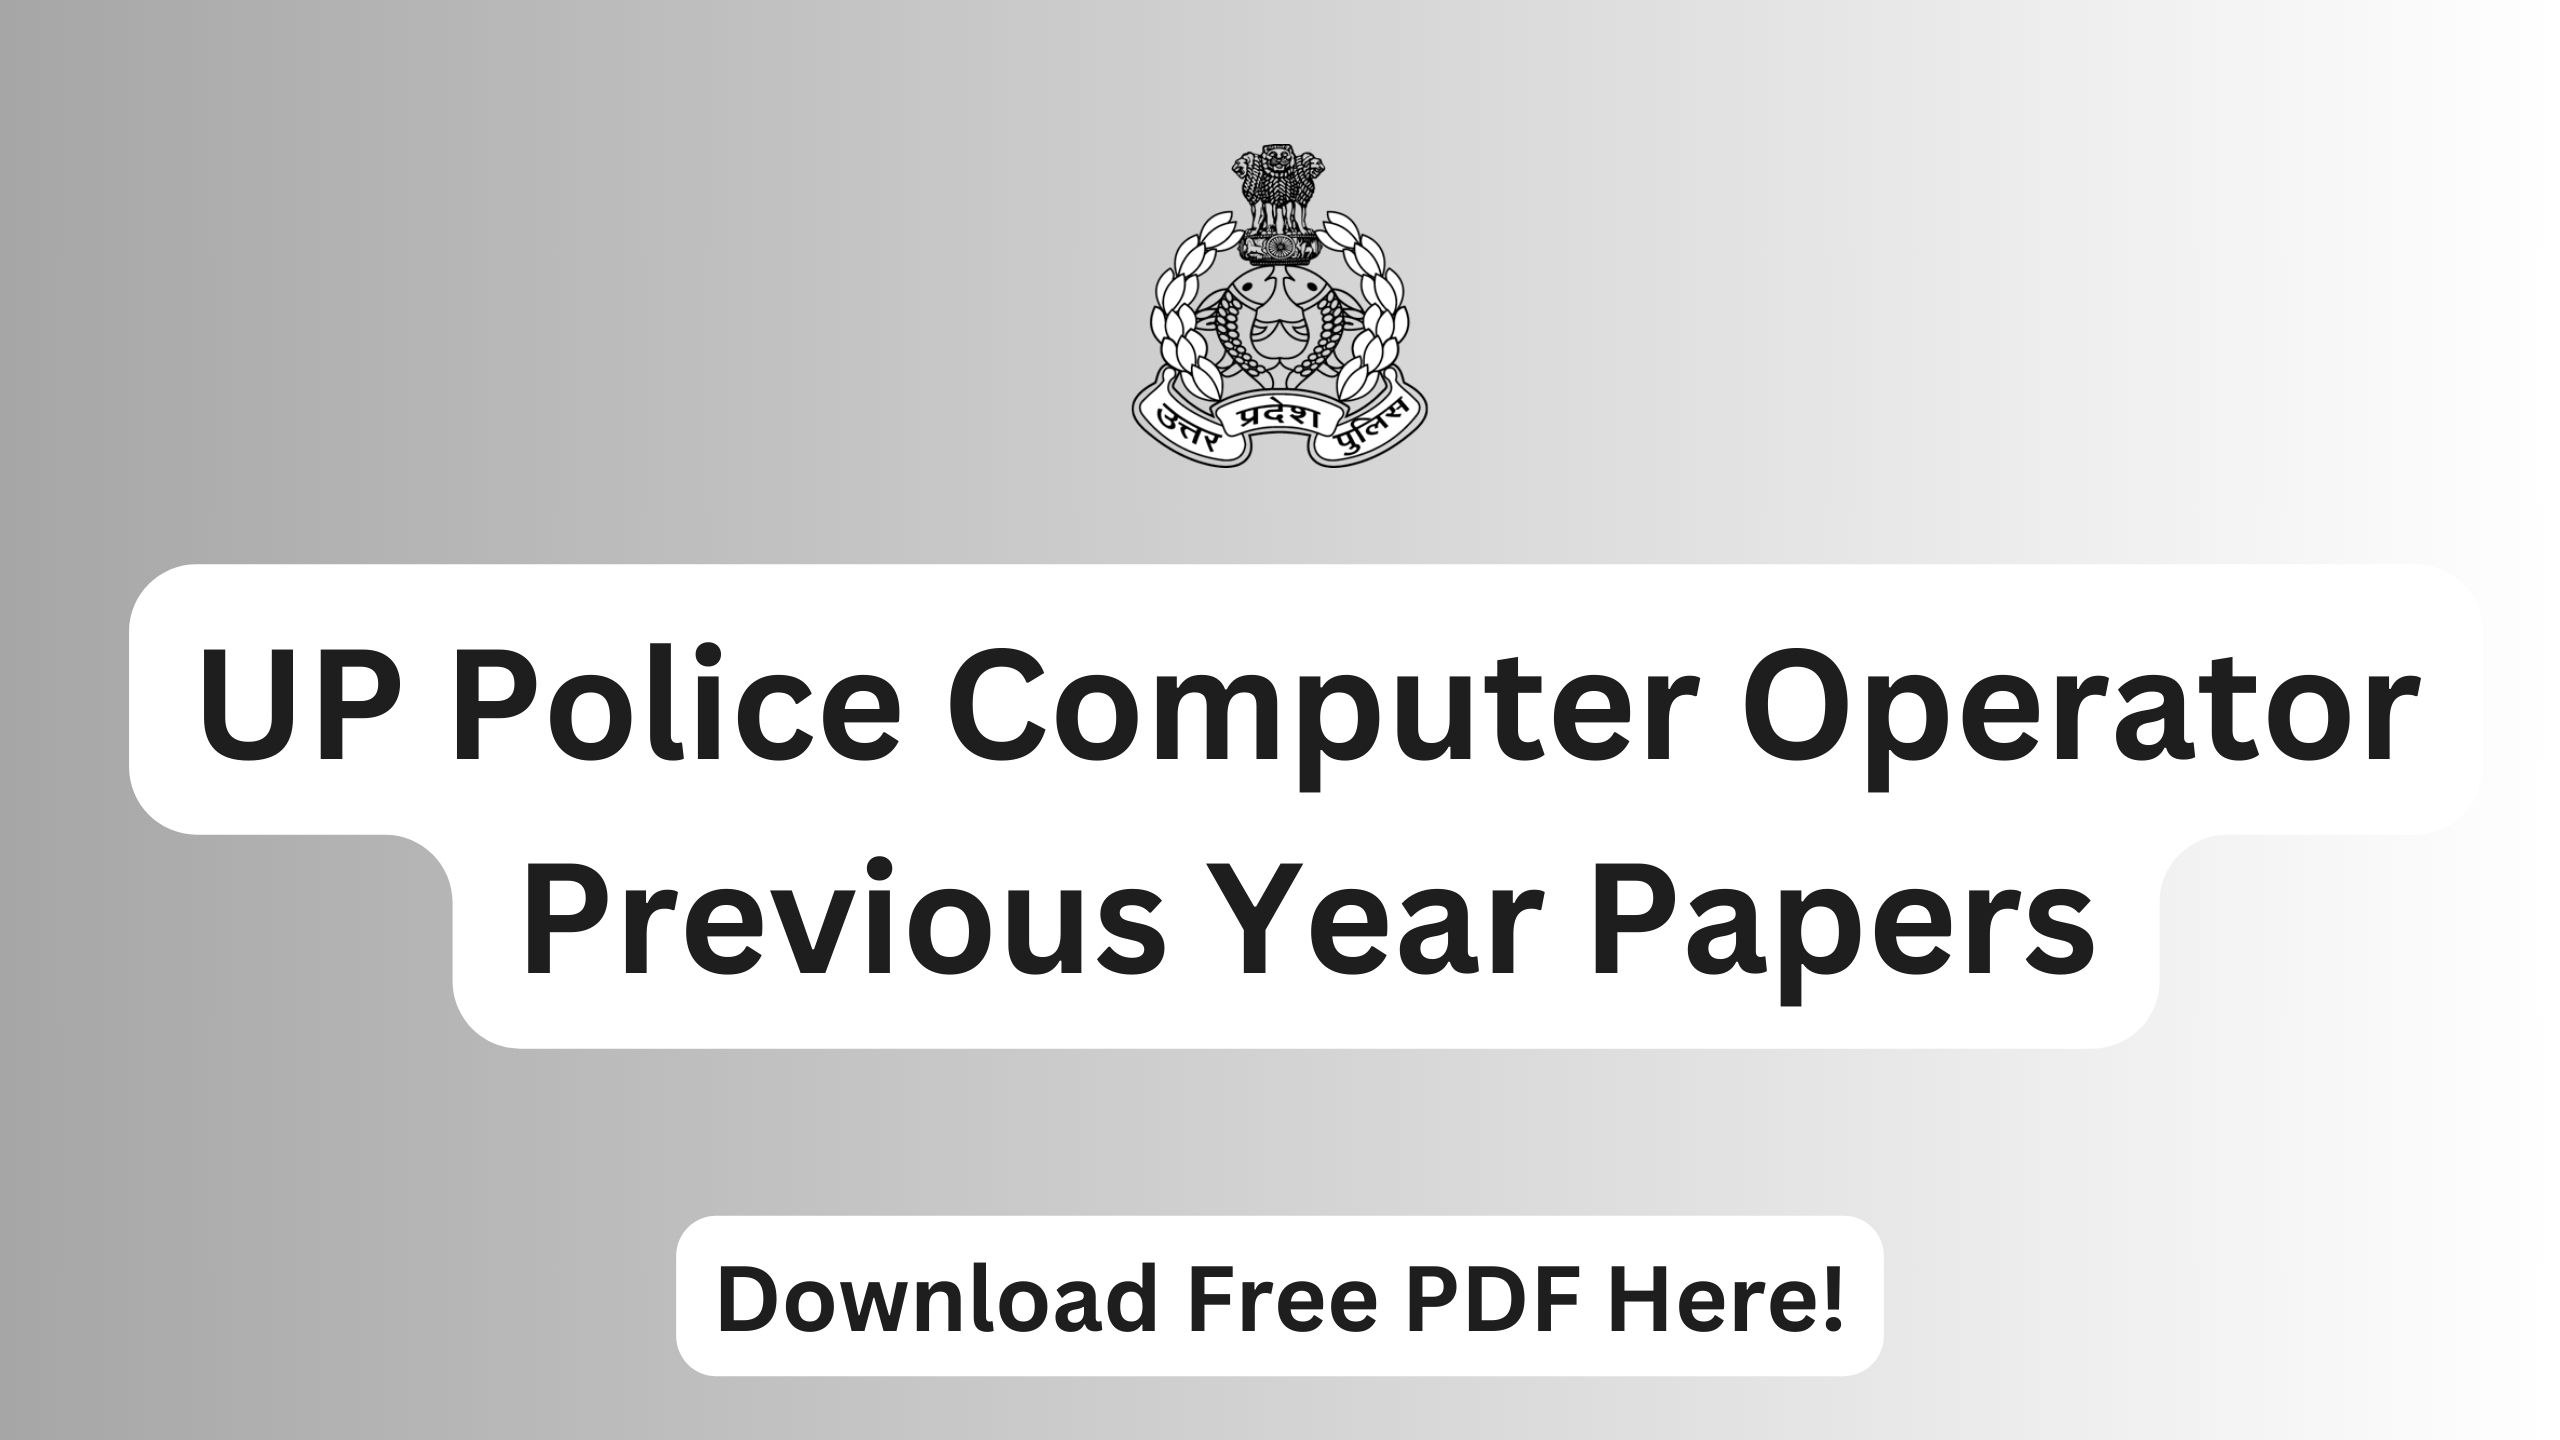 UP Police Computer Operator Previous Year Papers